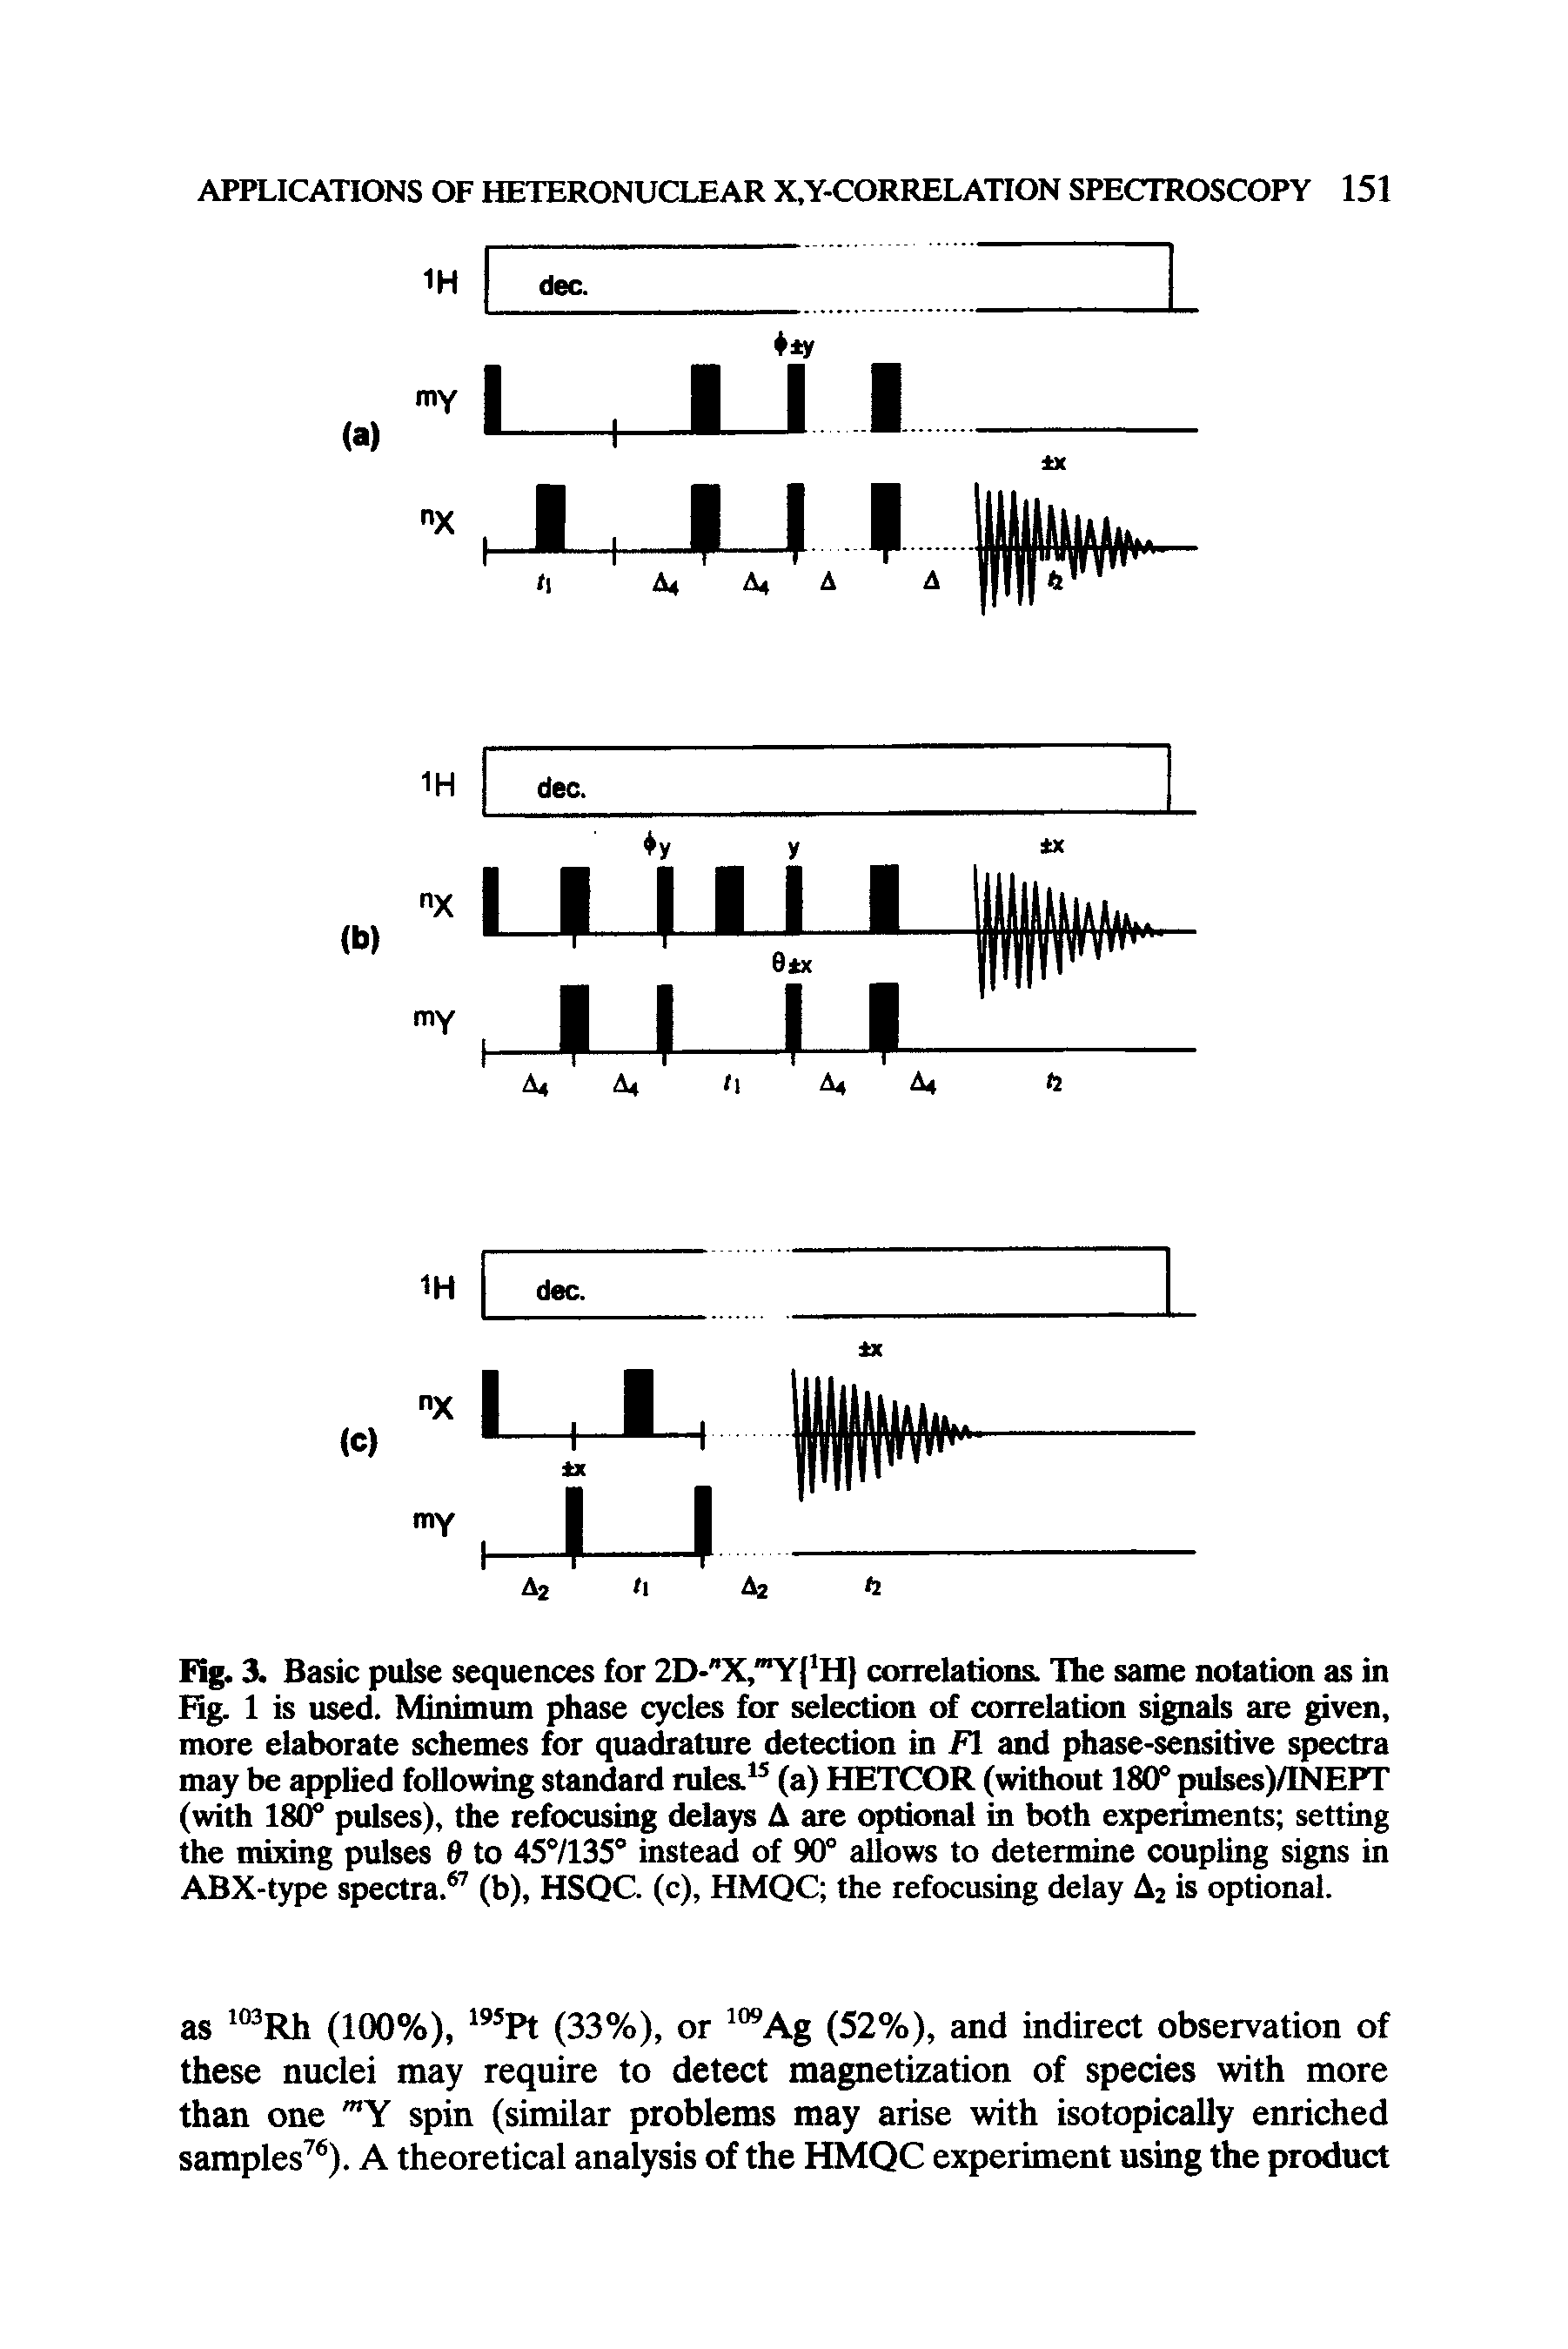 Fig. 3. Basic pulse sequences for 2D- X,"T H correlations. Tbe same notation as in Hg. 1 is used. Minimum phase cycles for selection of correlation signals are given, more elaborate schemes for quadrature detection in FI and phase-sensitive spectra may be applied following standard rules. (a) HETCOR (without 180° pulses)/INEPT (with 180° pulses), the refocusing delays A are optional in both experiments setting the mixing pulses 8 to 45°/135° instead of 90° allows to determine coupling signs in ABX-type spectra. (b), HSQC. (c), HMQC the refocusing delay A2 is optional.